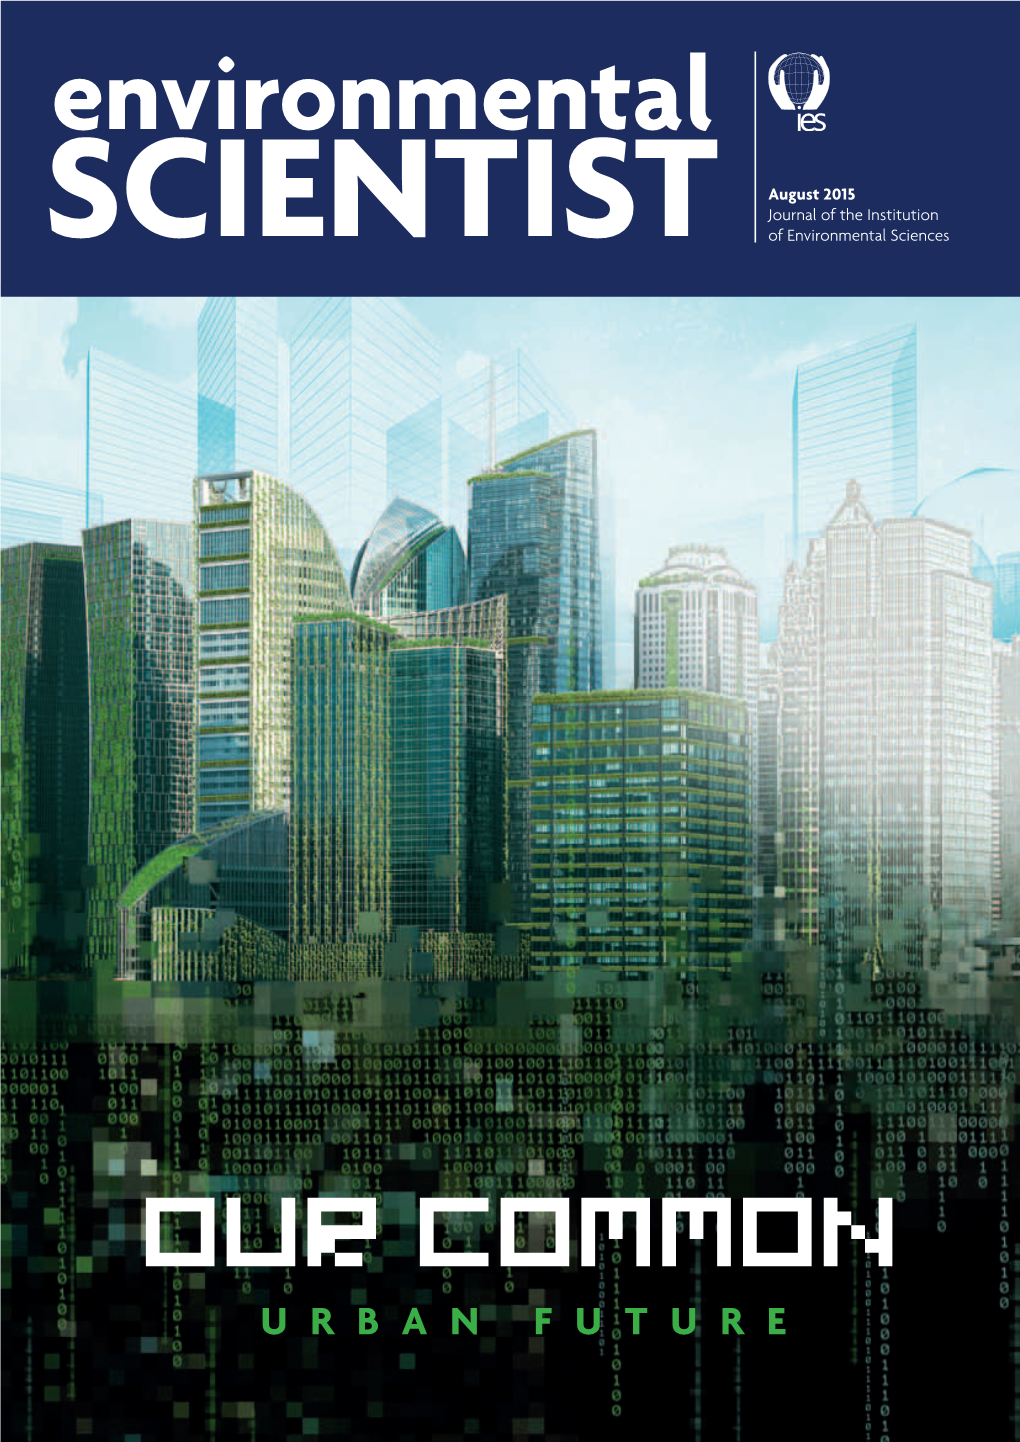 Our Common Futureour Urban We’Re One of the Sound Science UK’S August 2015